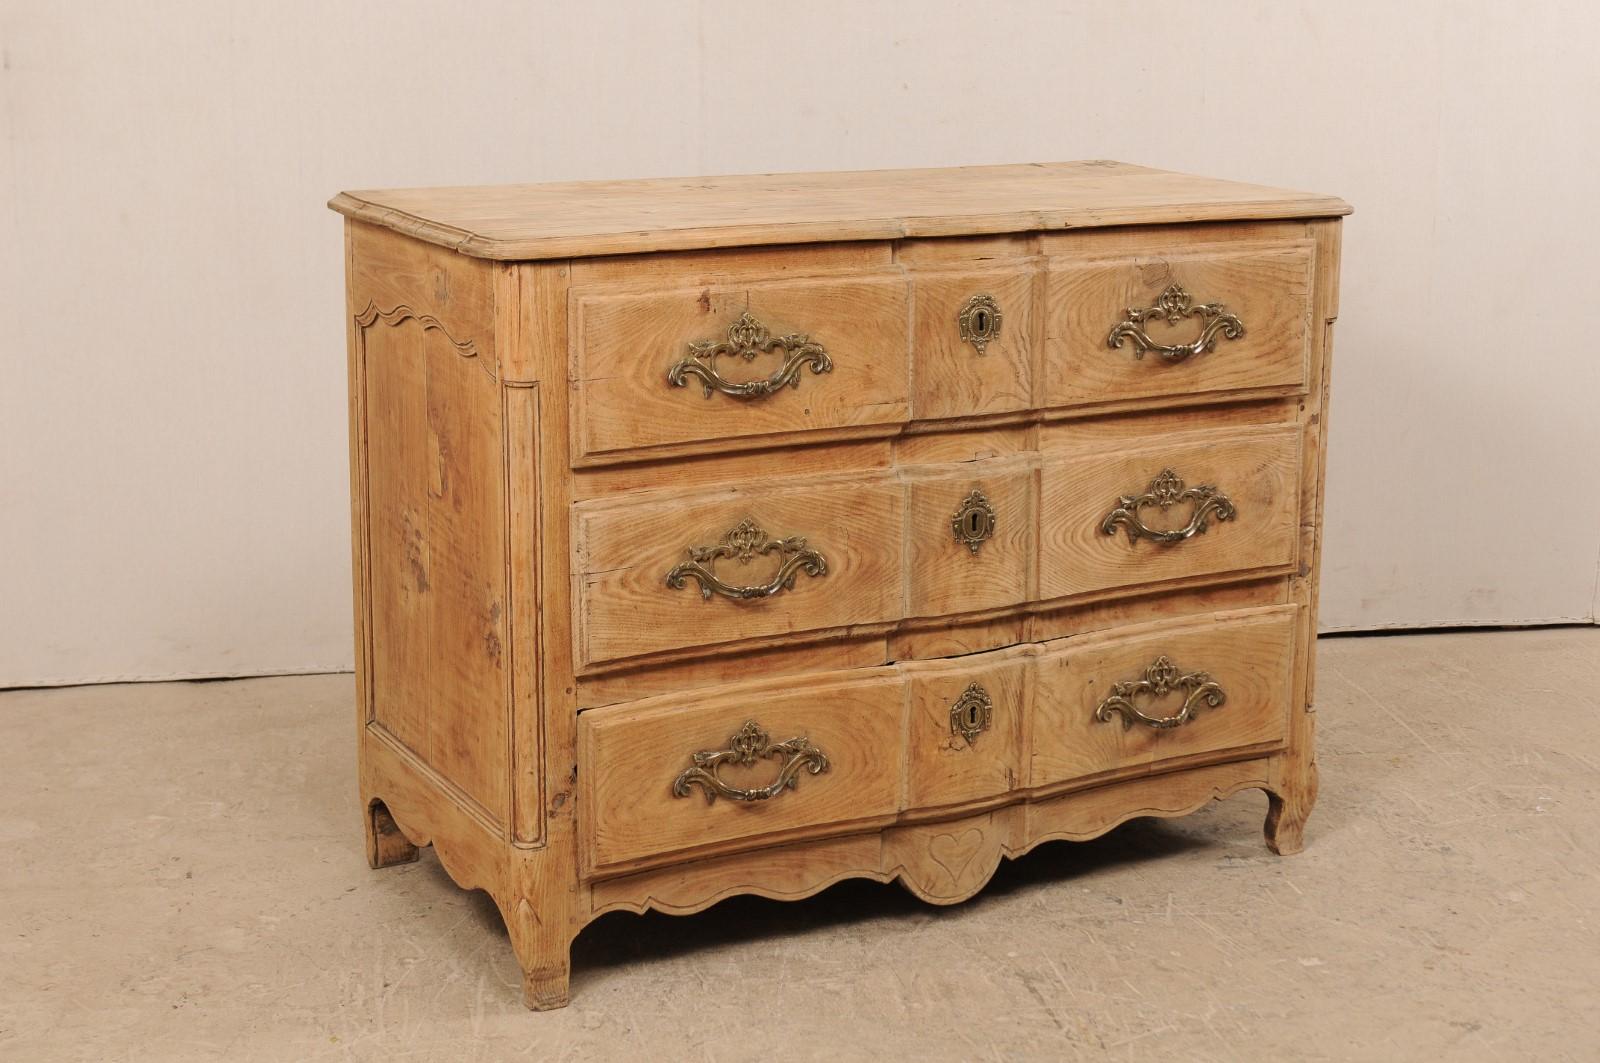 An 18th century French chest of three drawers. This antique commode from France features a delicate oxbow-front, carved and rounded front posts, decoratively carved single recessed panel sides, and a scalloped skirt at three sides with heart-shaped